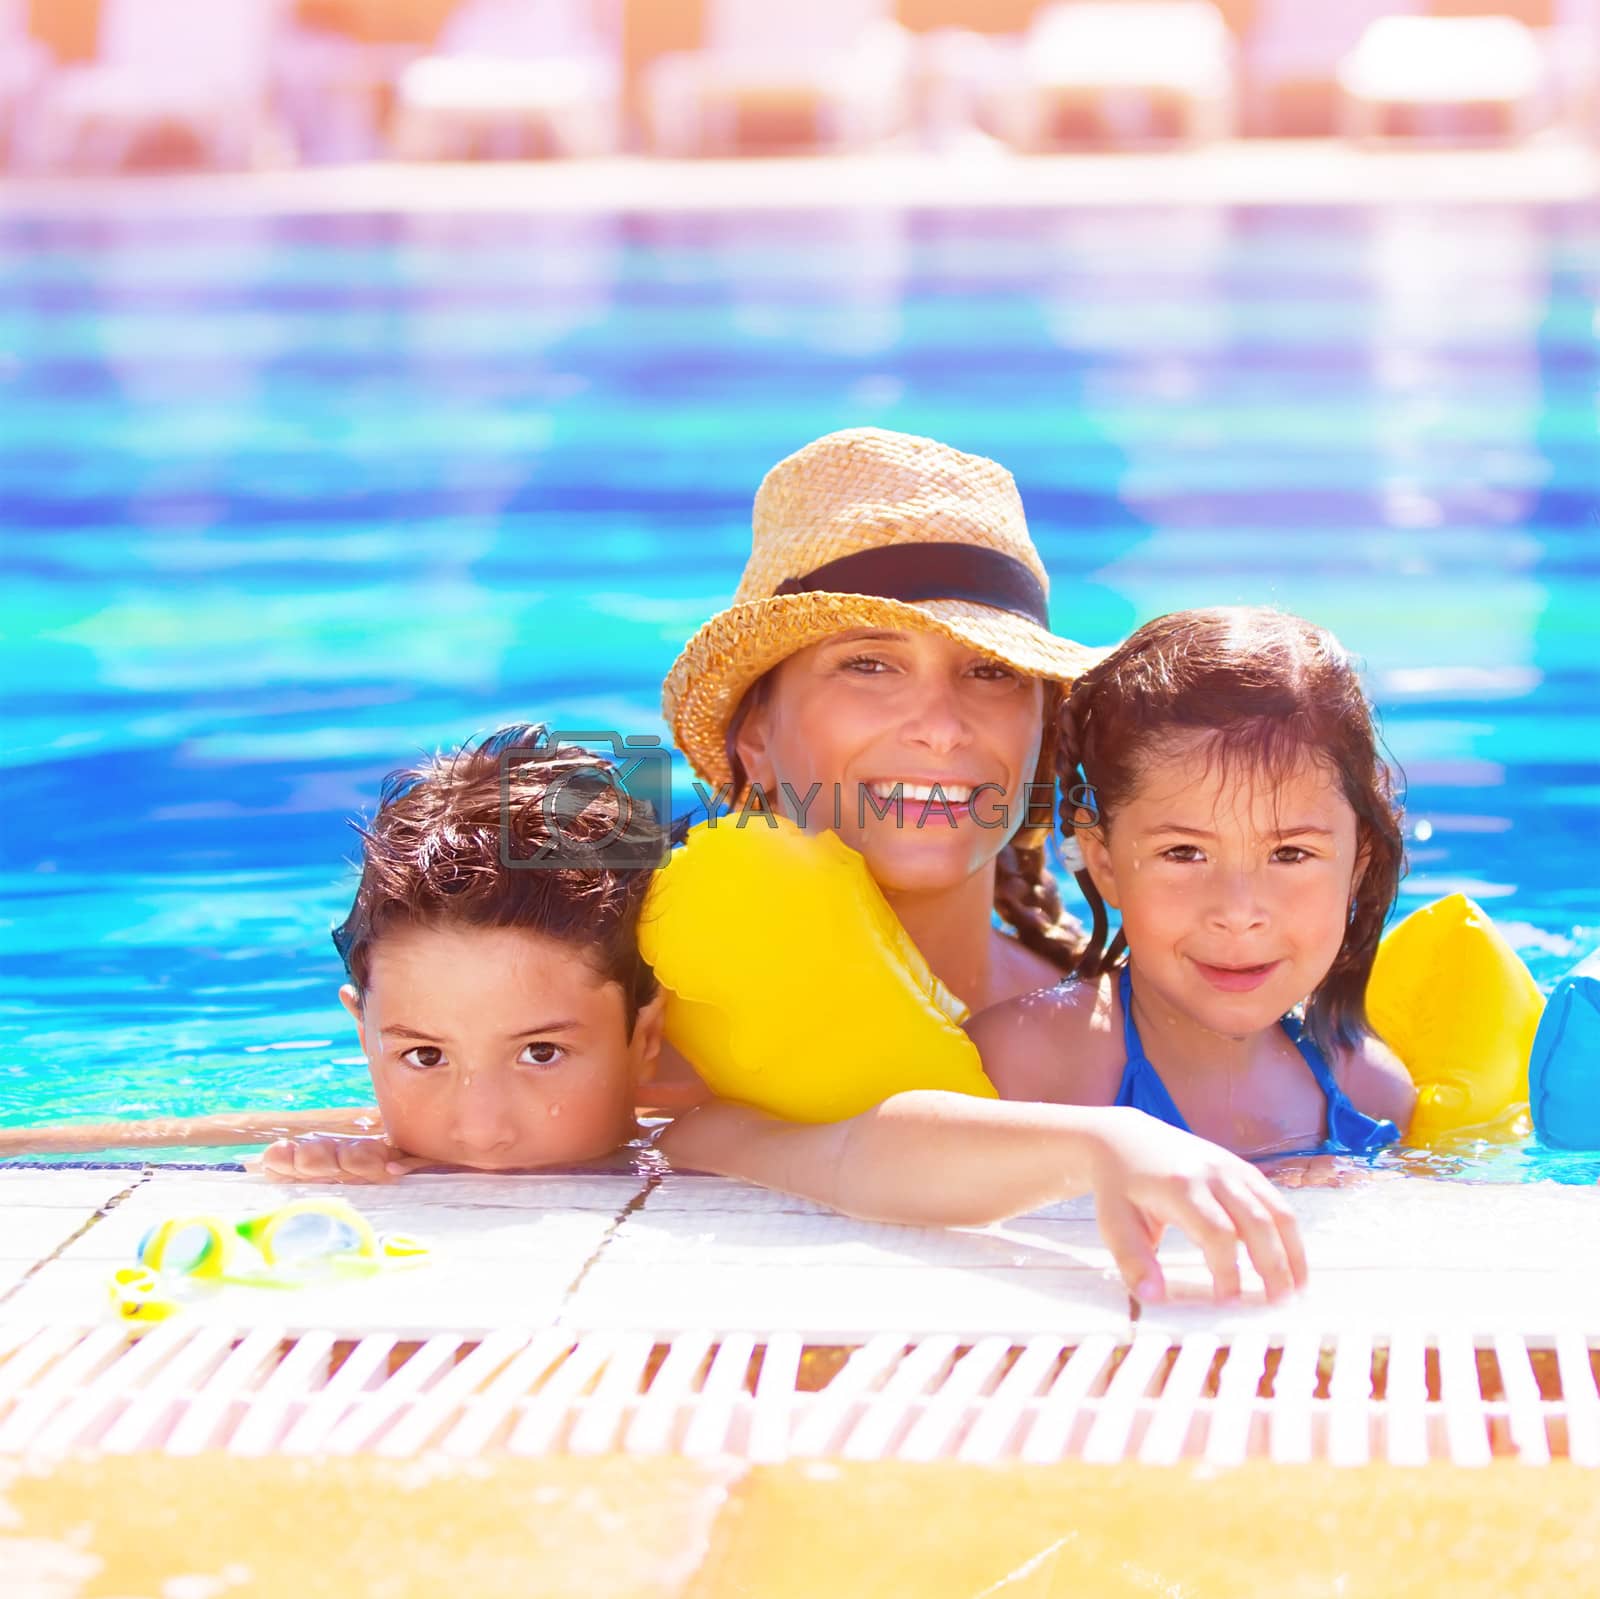 Royalty free image of Mother with kids in poolside by Anna_Omelchenko